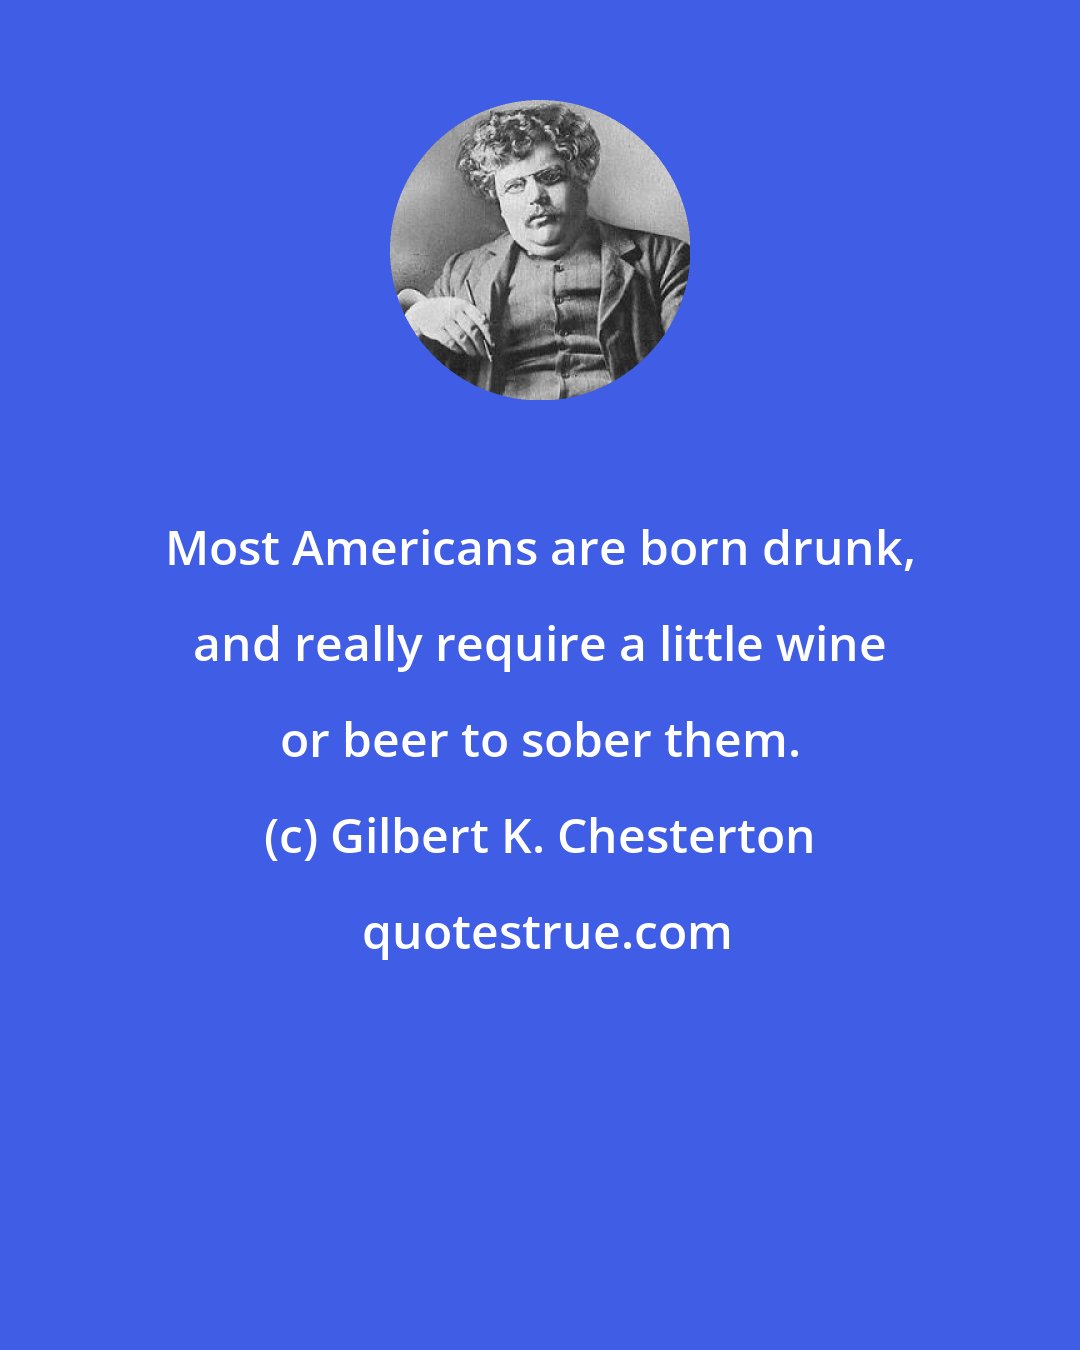 Gilbert K. Chesterton: Most Americans are born drunk, and really require a little wine or beer to sober them.